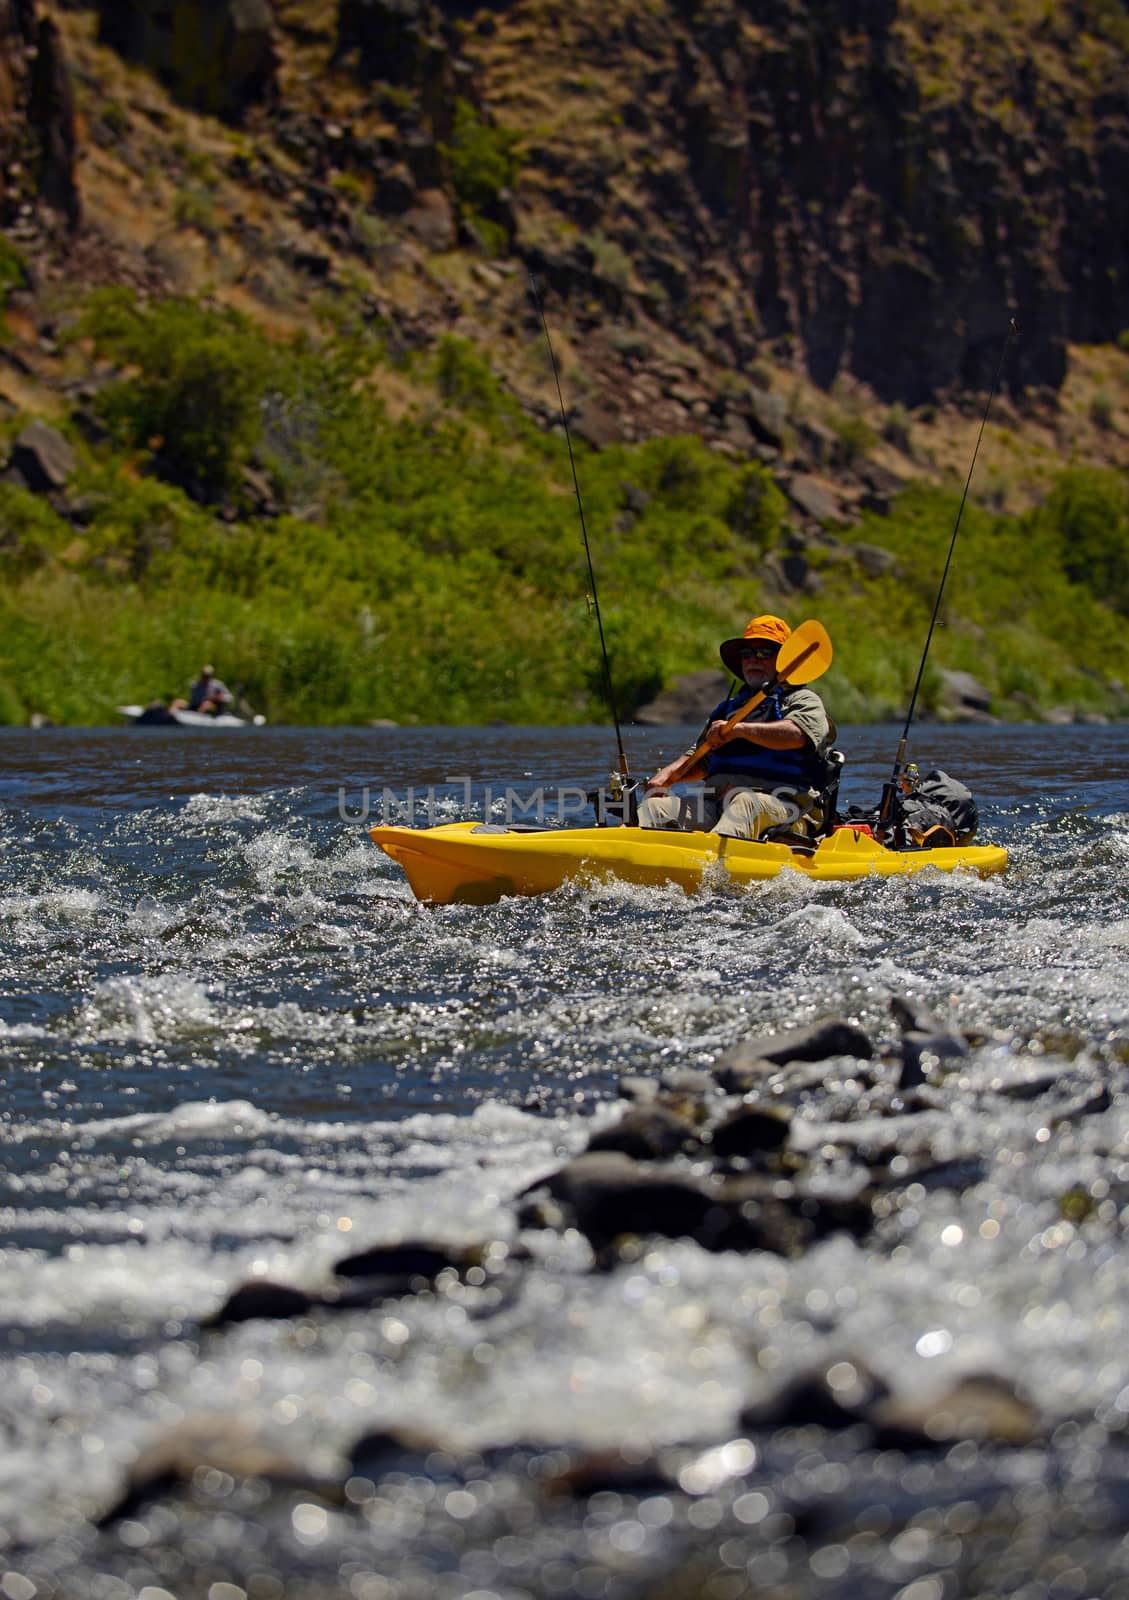 man fishing near rapids in a river in the wilderness while paddling a kayak